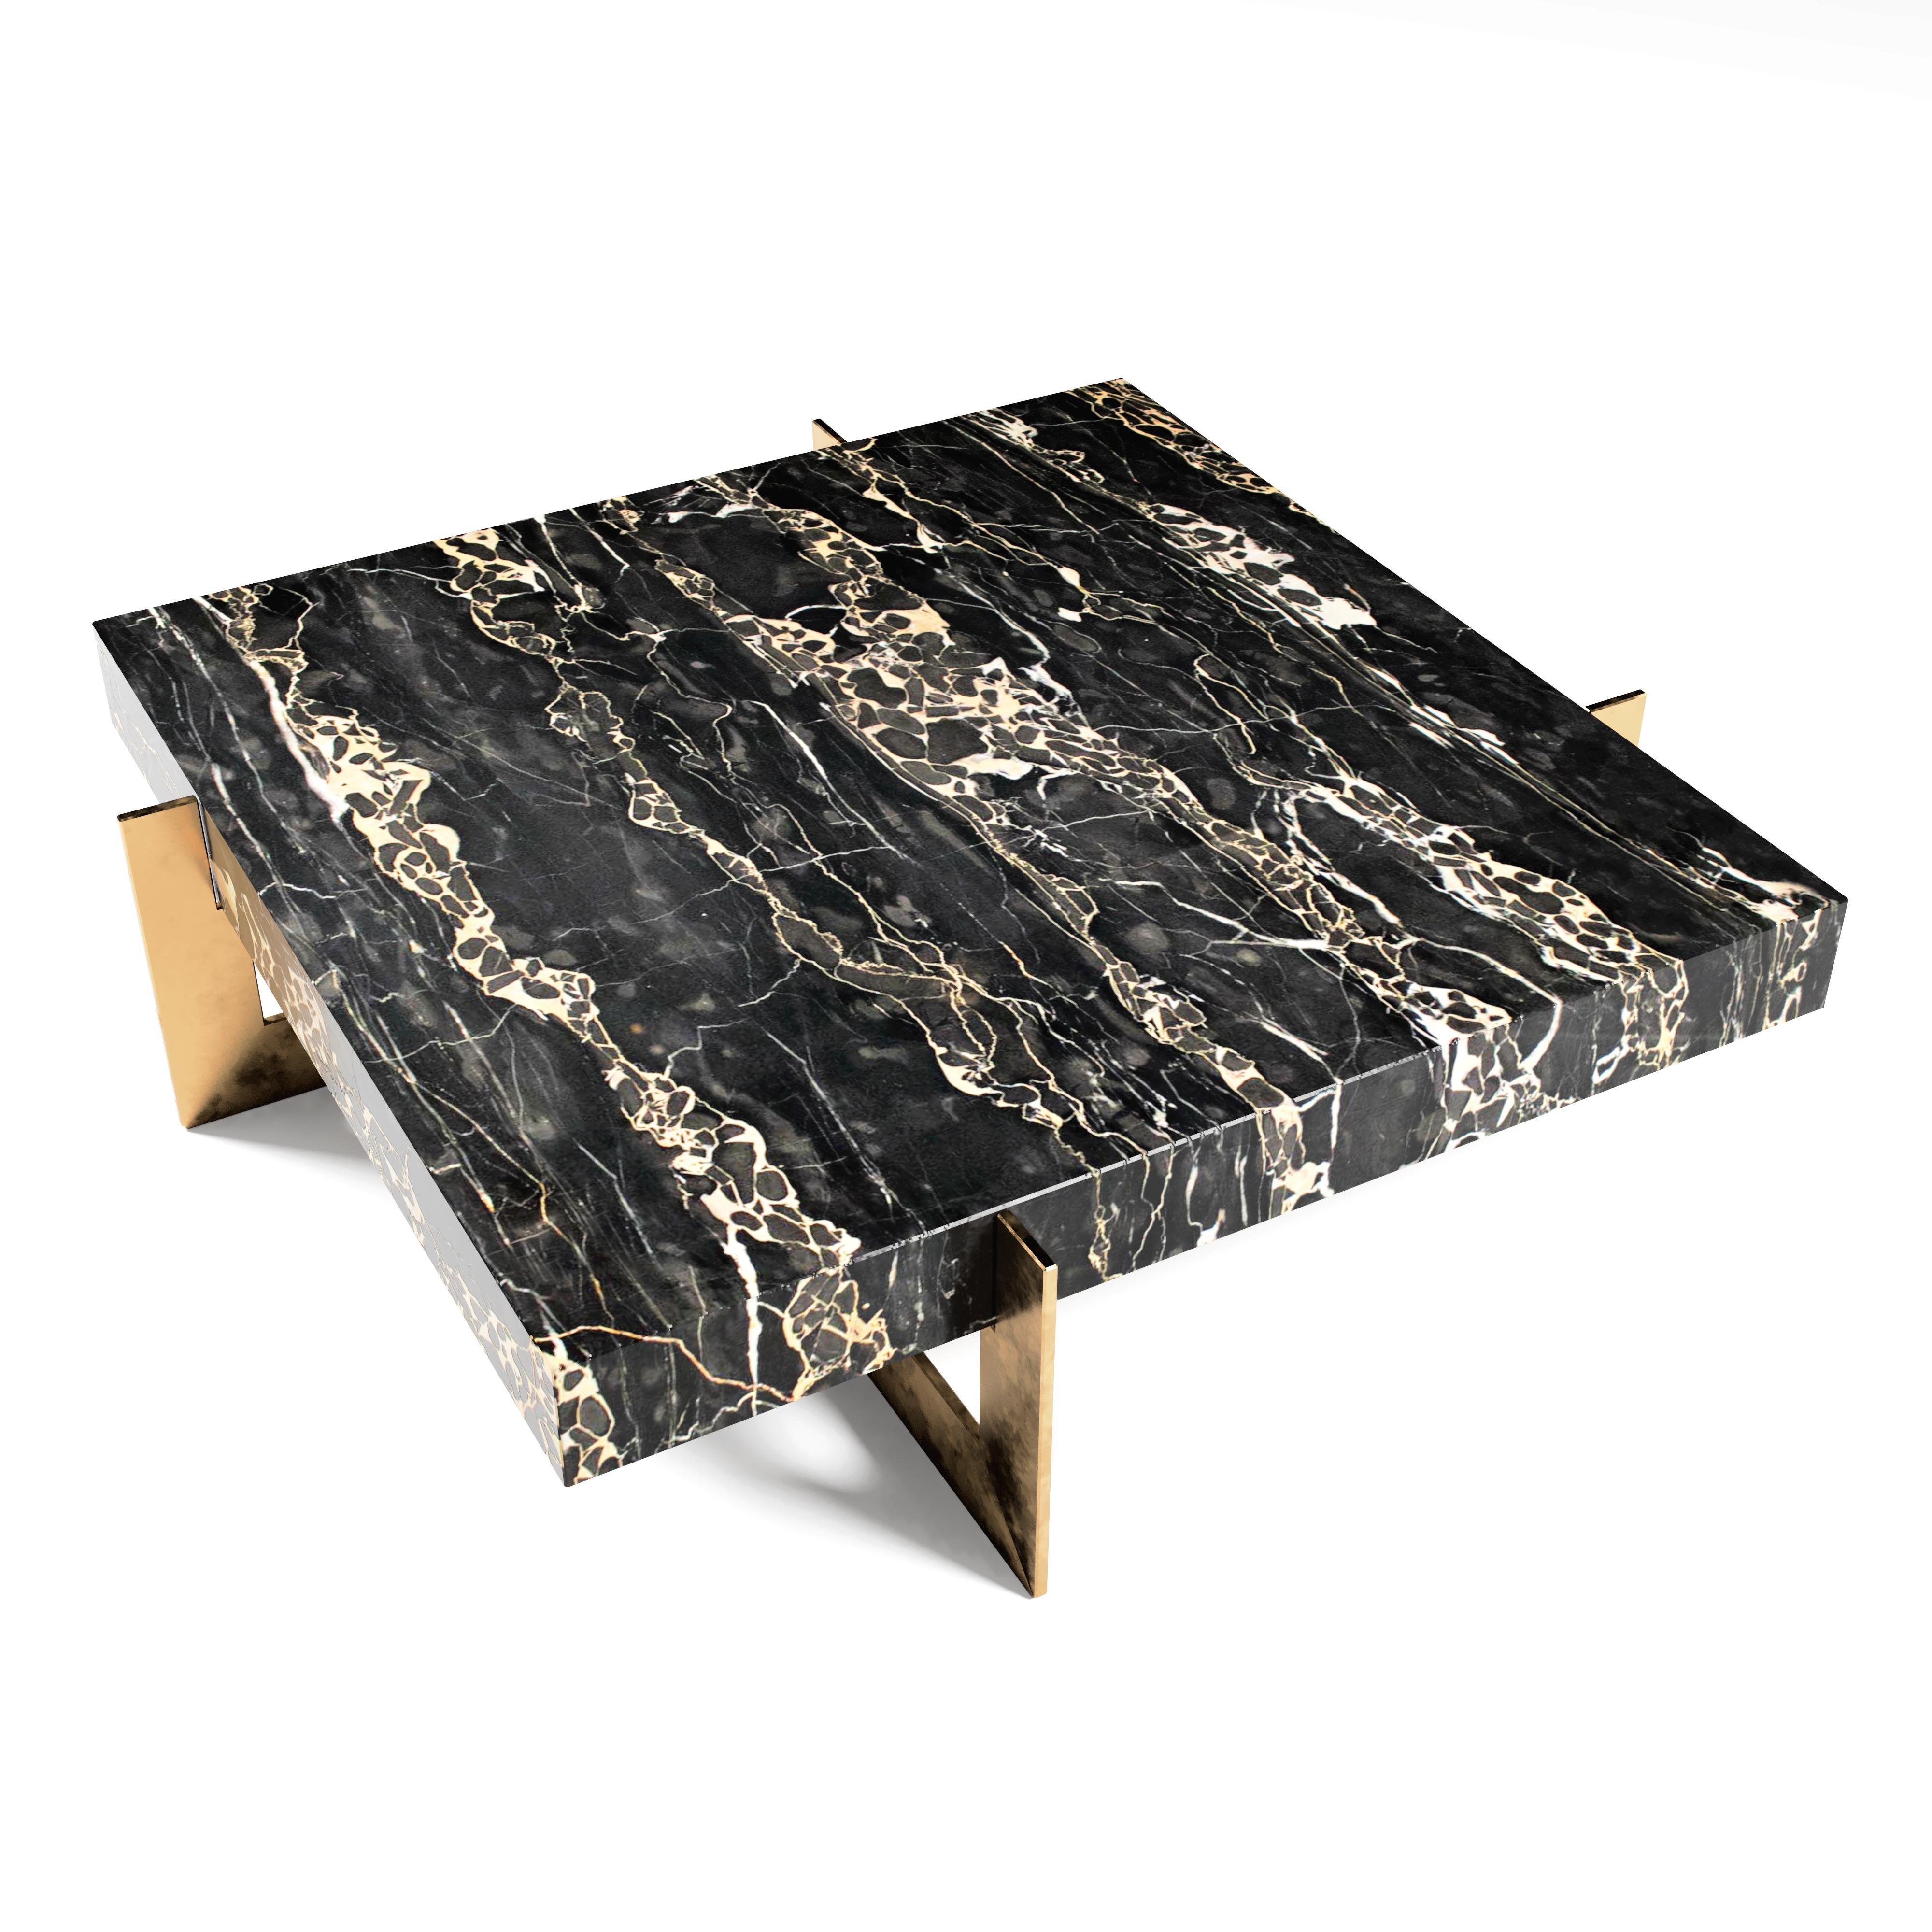 “The Golden Rock II” Center Coffee Table ft. Nero Portoro Marble and Burnished Brass Base in “Satin” finish.

When one hears the term “Golden Rock”, it’s hard not to envisage scenes of regal beauty. A mansion of gold glittering in the sunset, or a